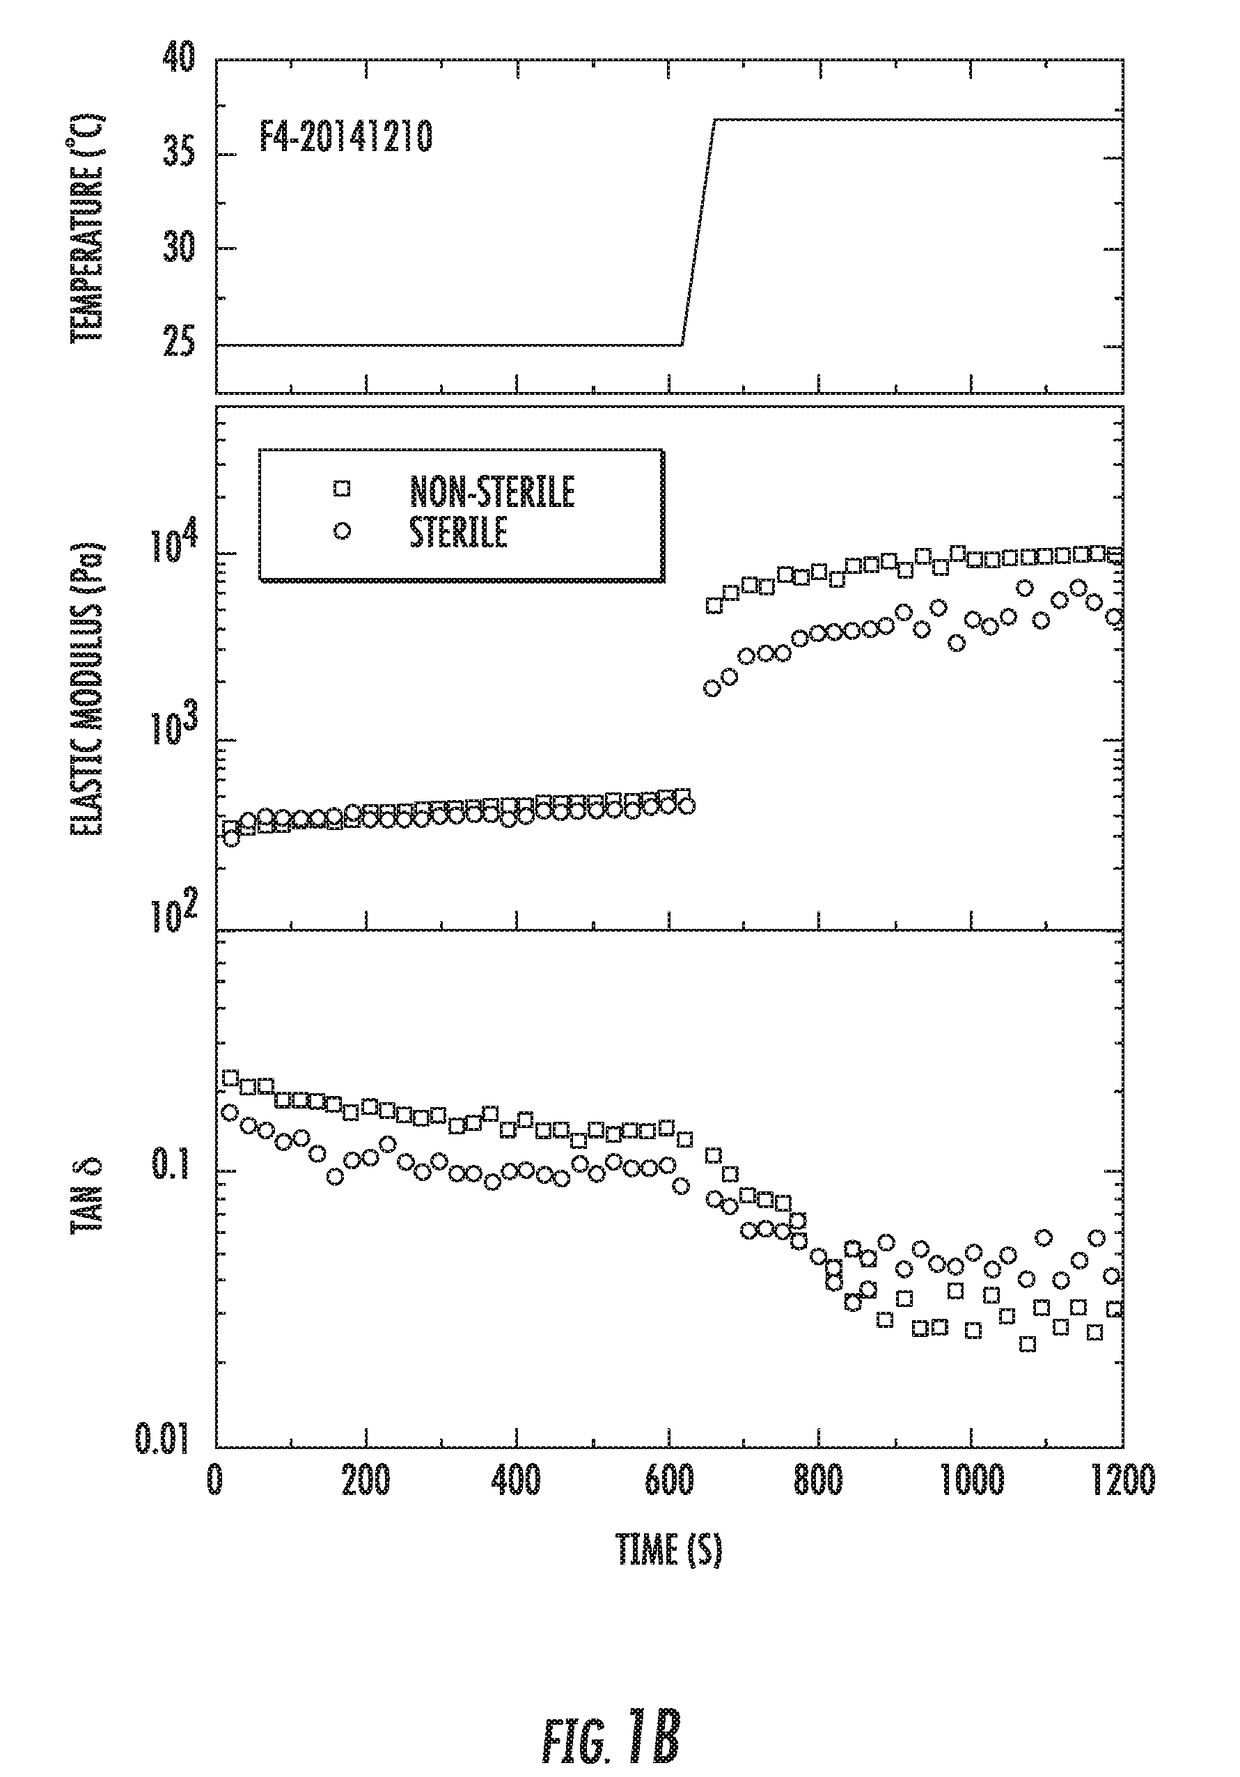 Veterinary compositions for use in treating mastitis, and associated methods